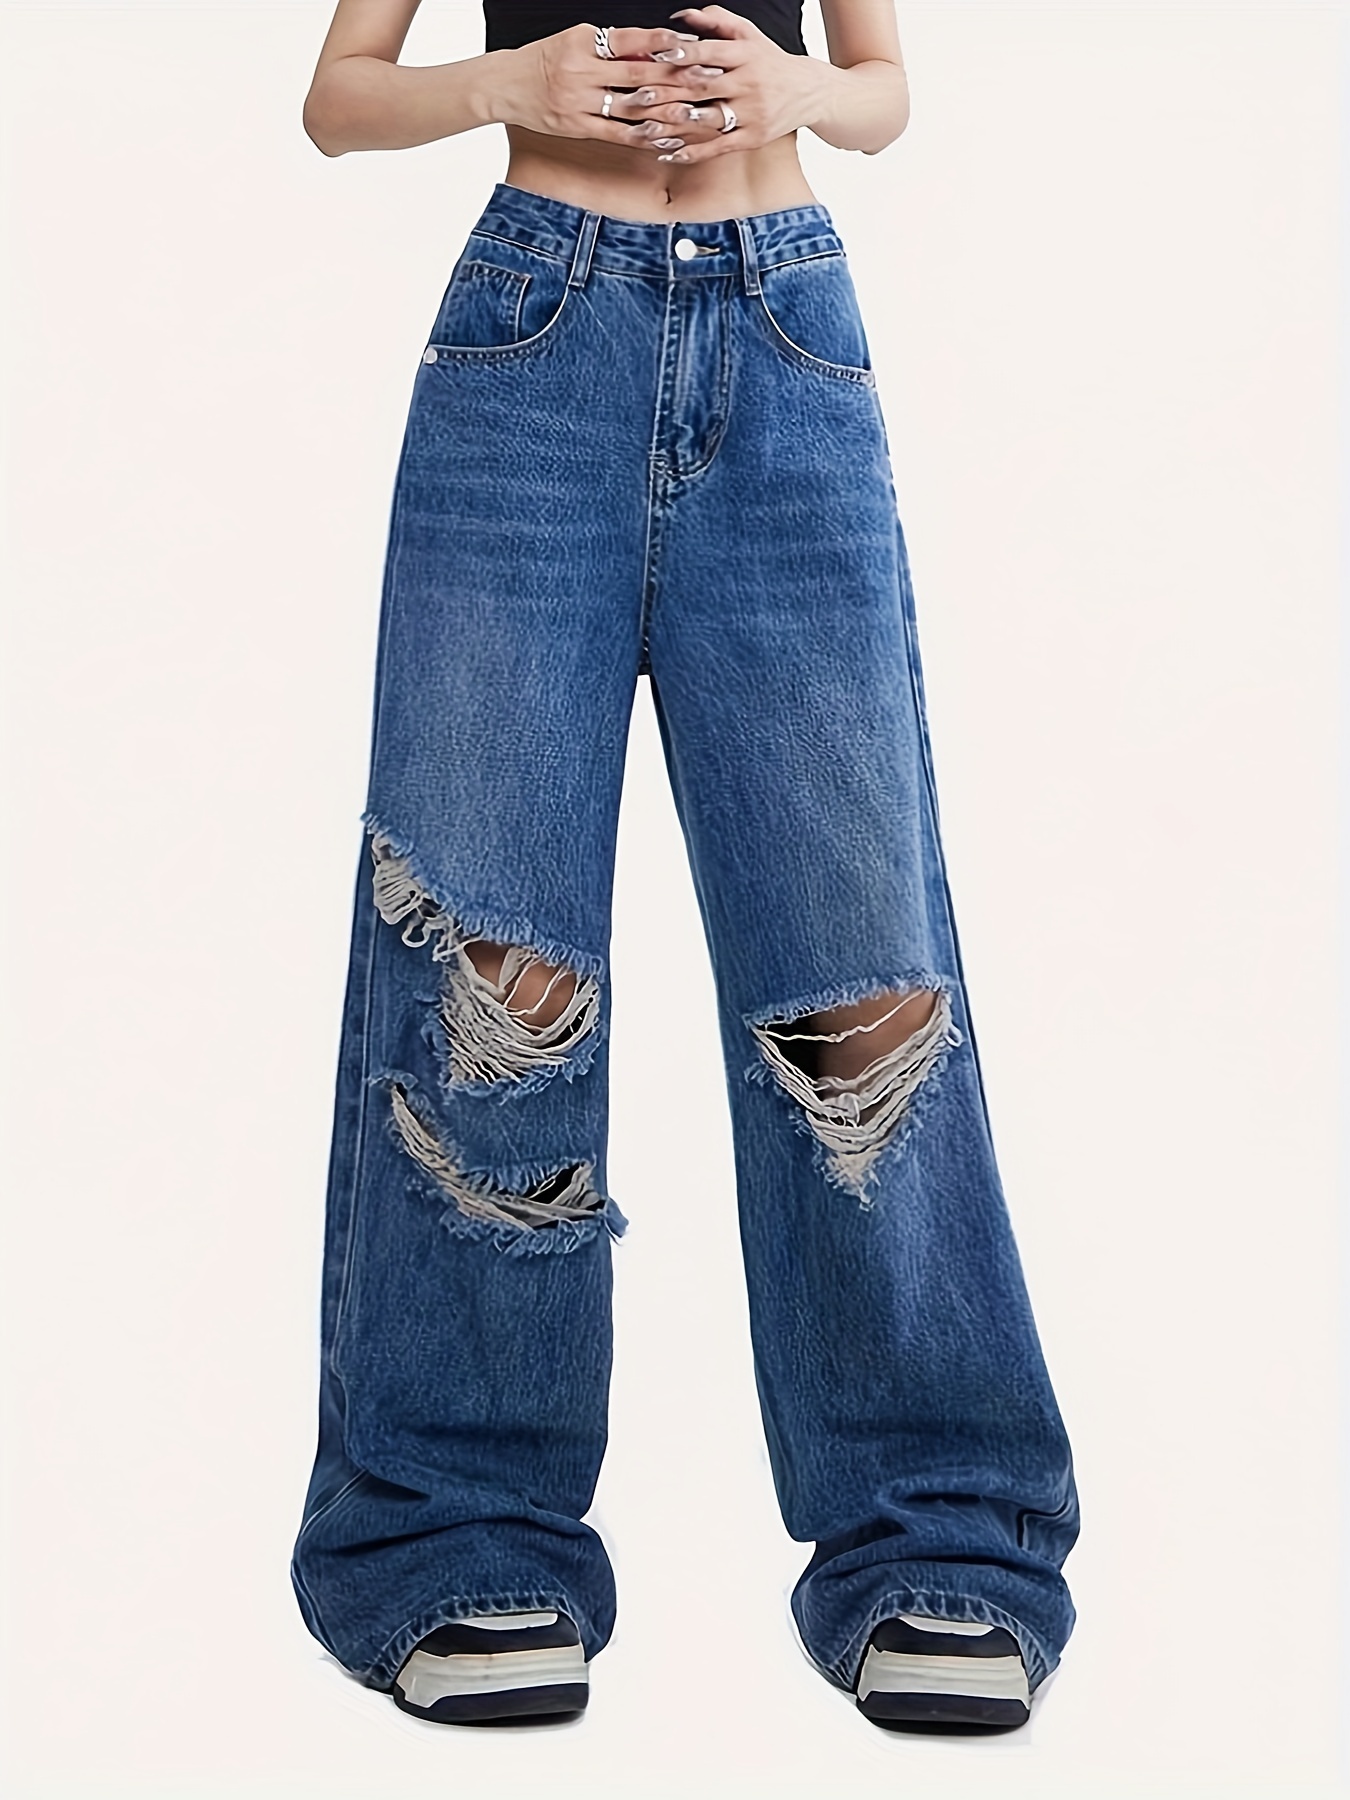 Ripped Holes Casual Baggy Jeans, Loose Fit High Waist Wide Legs Jeans,  Women's Denim Jeans & Clothing